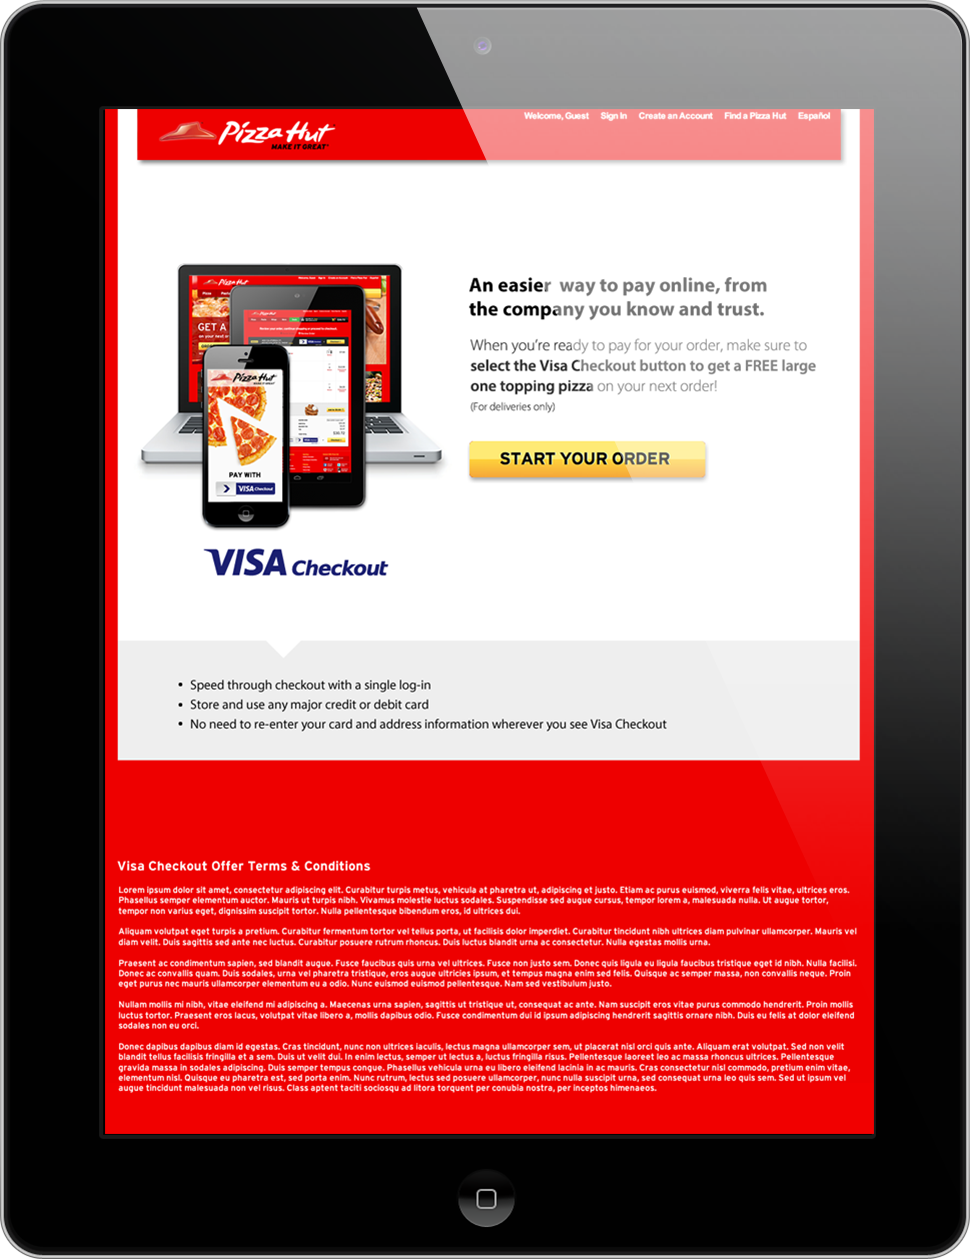 A tablet displaying an overview of Visa Checkout on the Pizza Hut website.